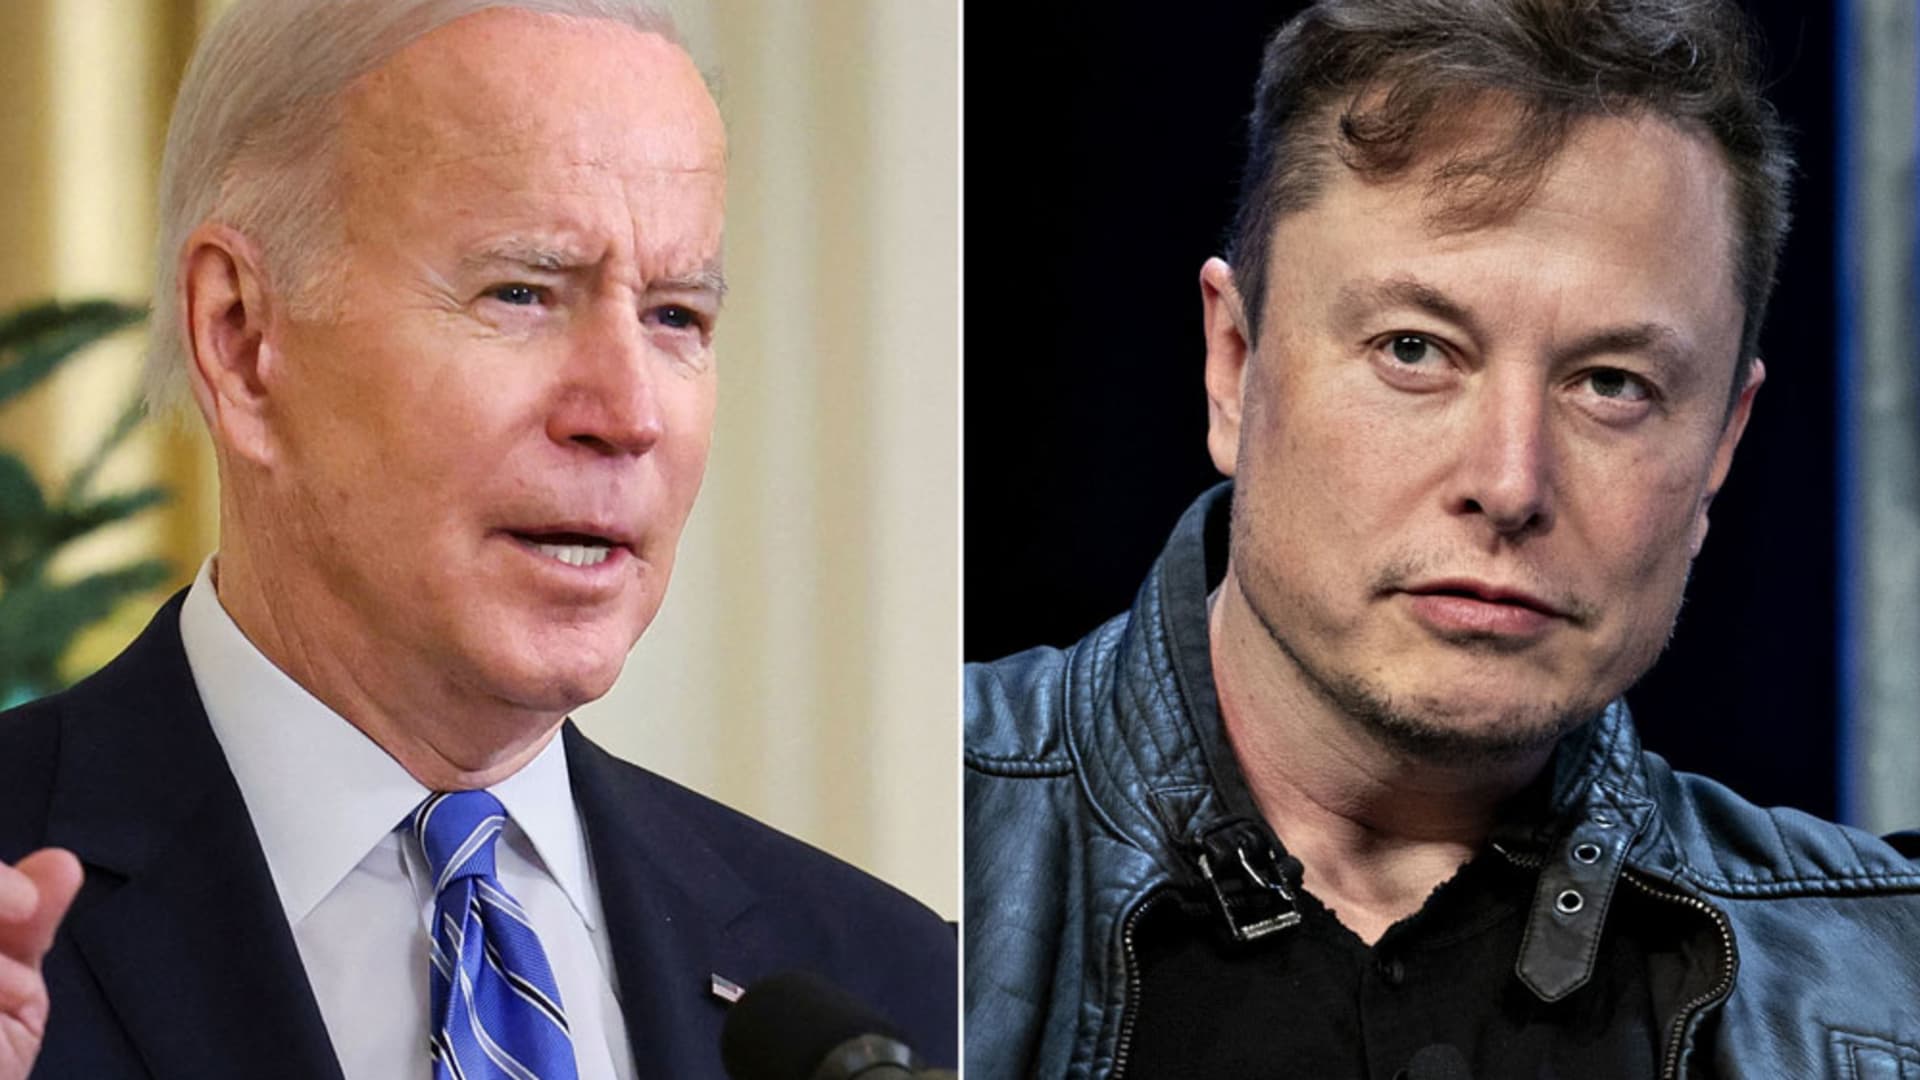 President Biden says Elon Musk’s relationships with other countries are worth looking into